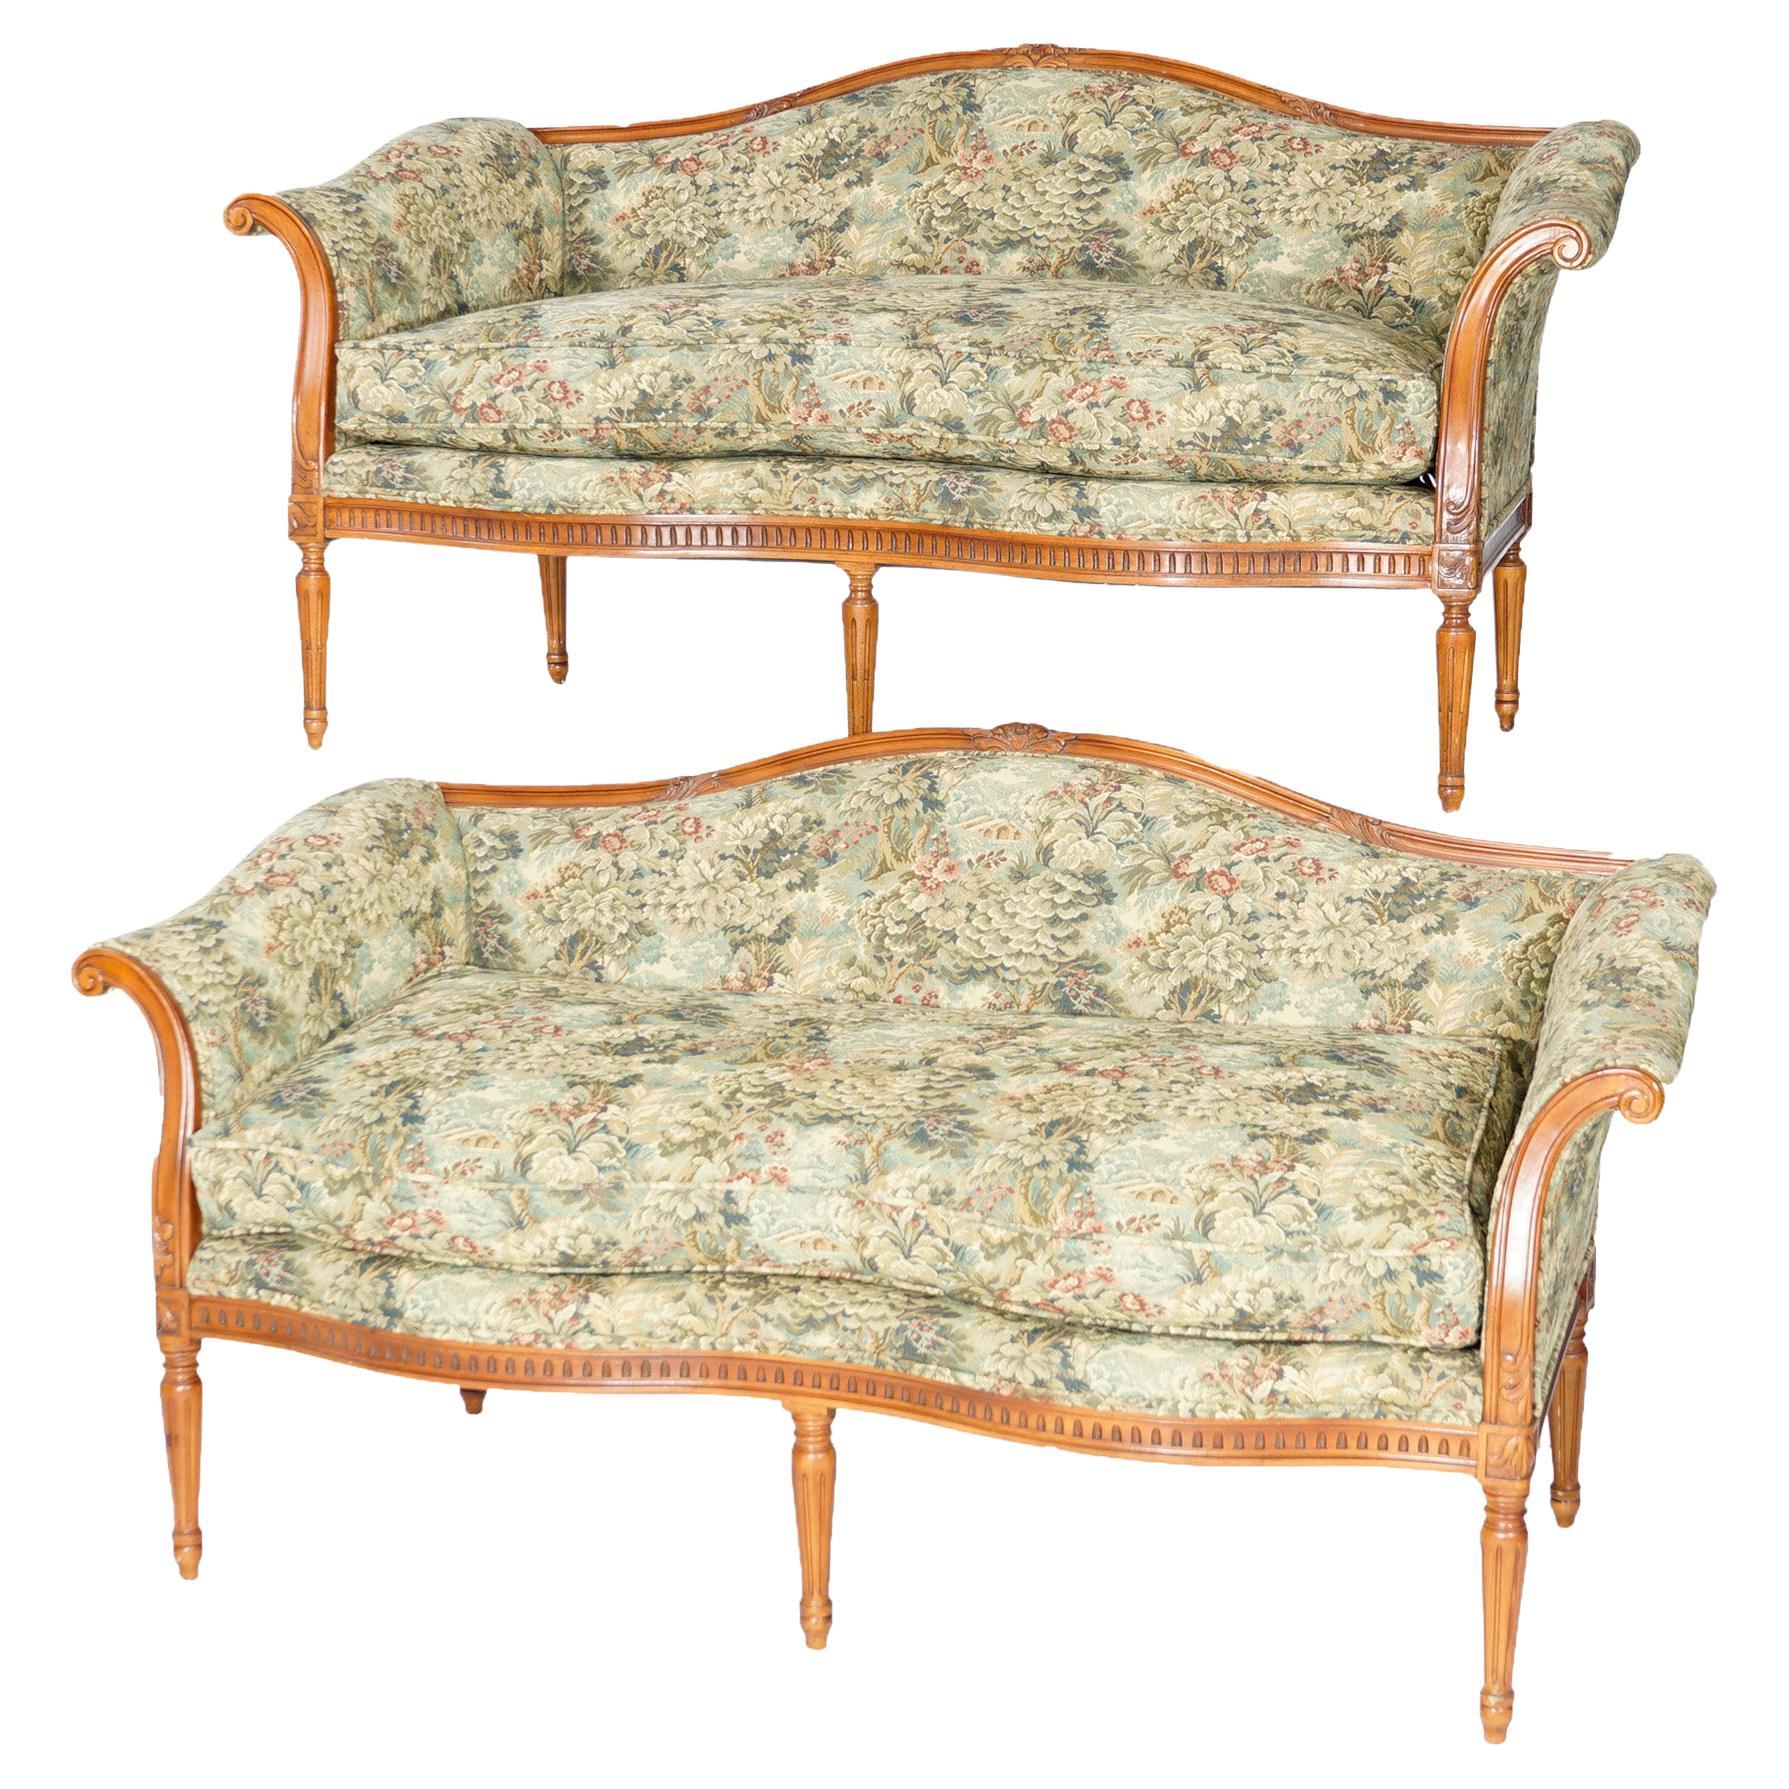 Pair French Style John Widdicomb Furniture Company Upholstered Settees, 20th C.